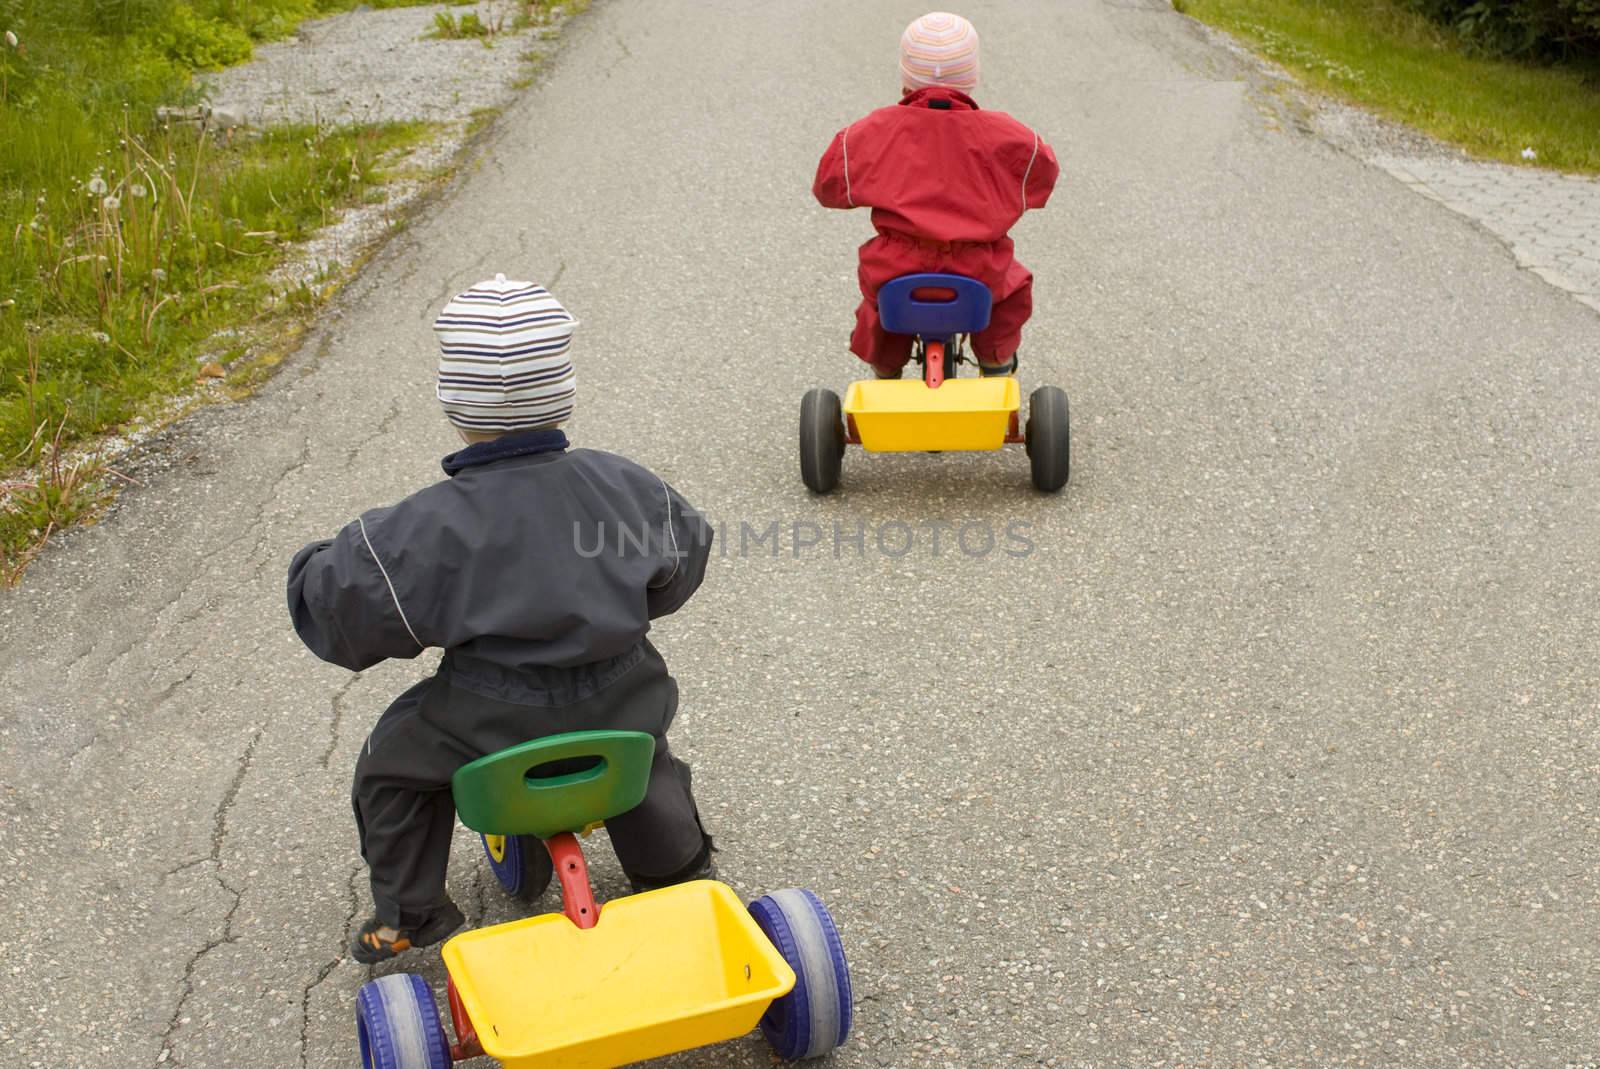 Children racing on tricycles, child in red leading in front of child in blue